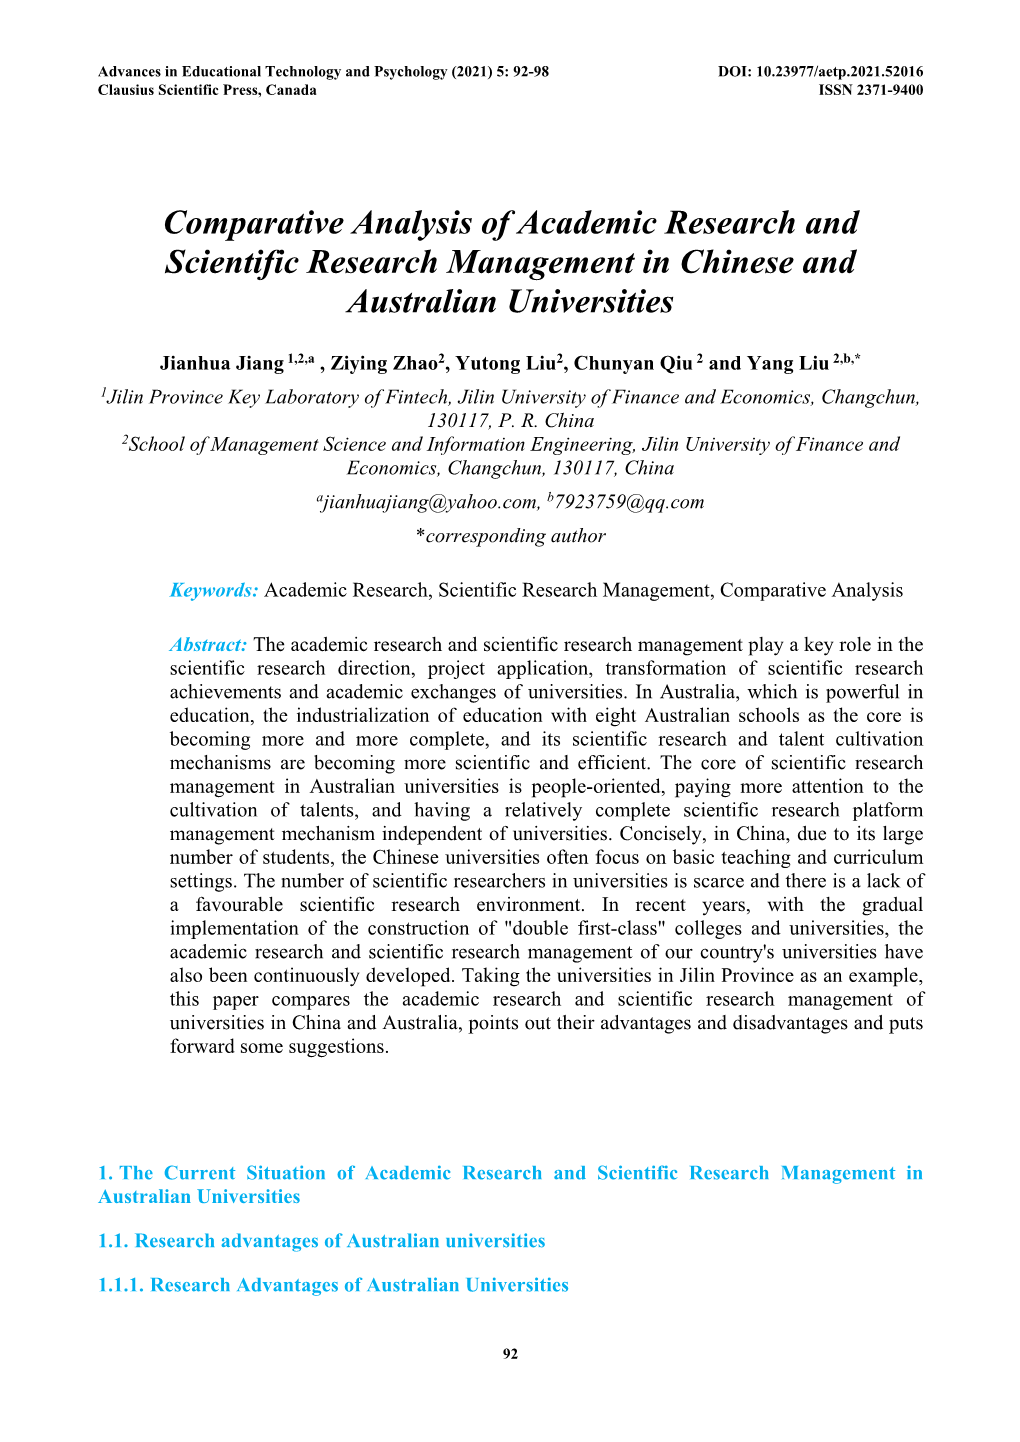 Comparative Analysis of Academic Research and Scientific Research Management in Chinese and Australian Universities